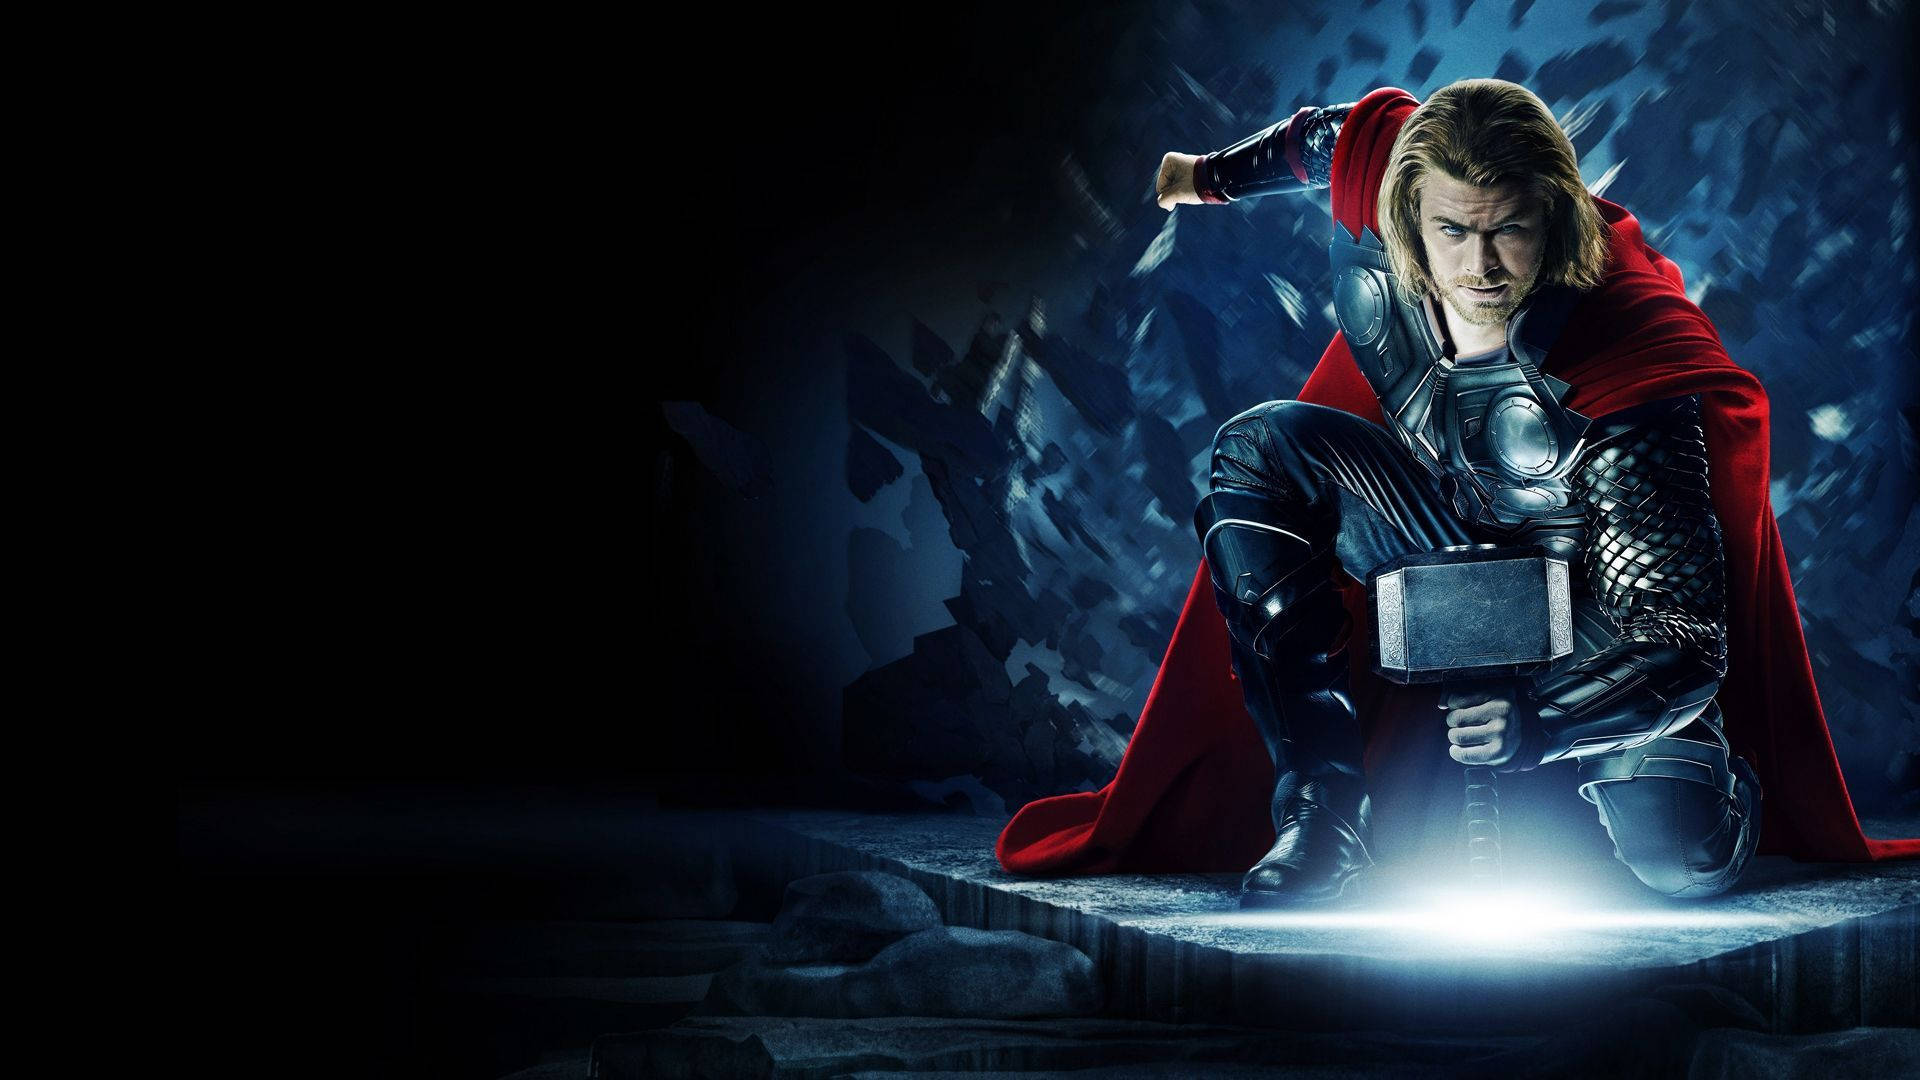 Protecting the world with his powers and Mjolnir, Thor the Superhero Wallpaper